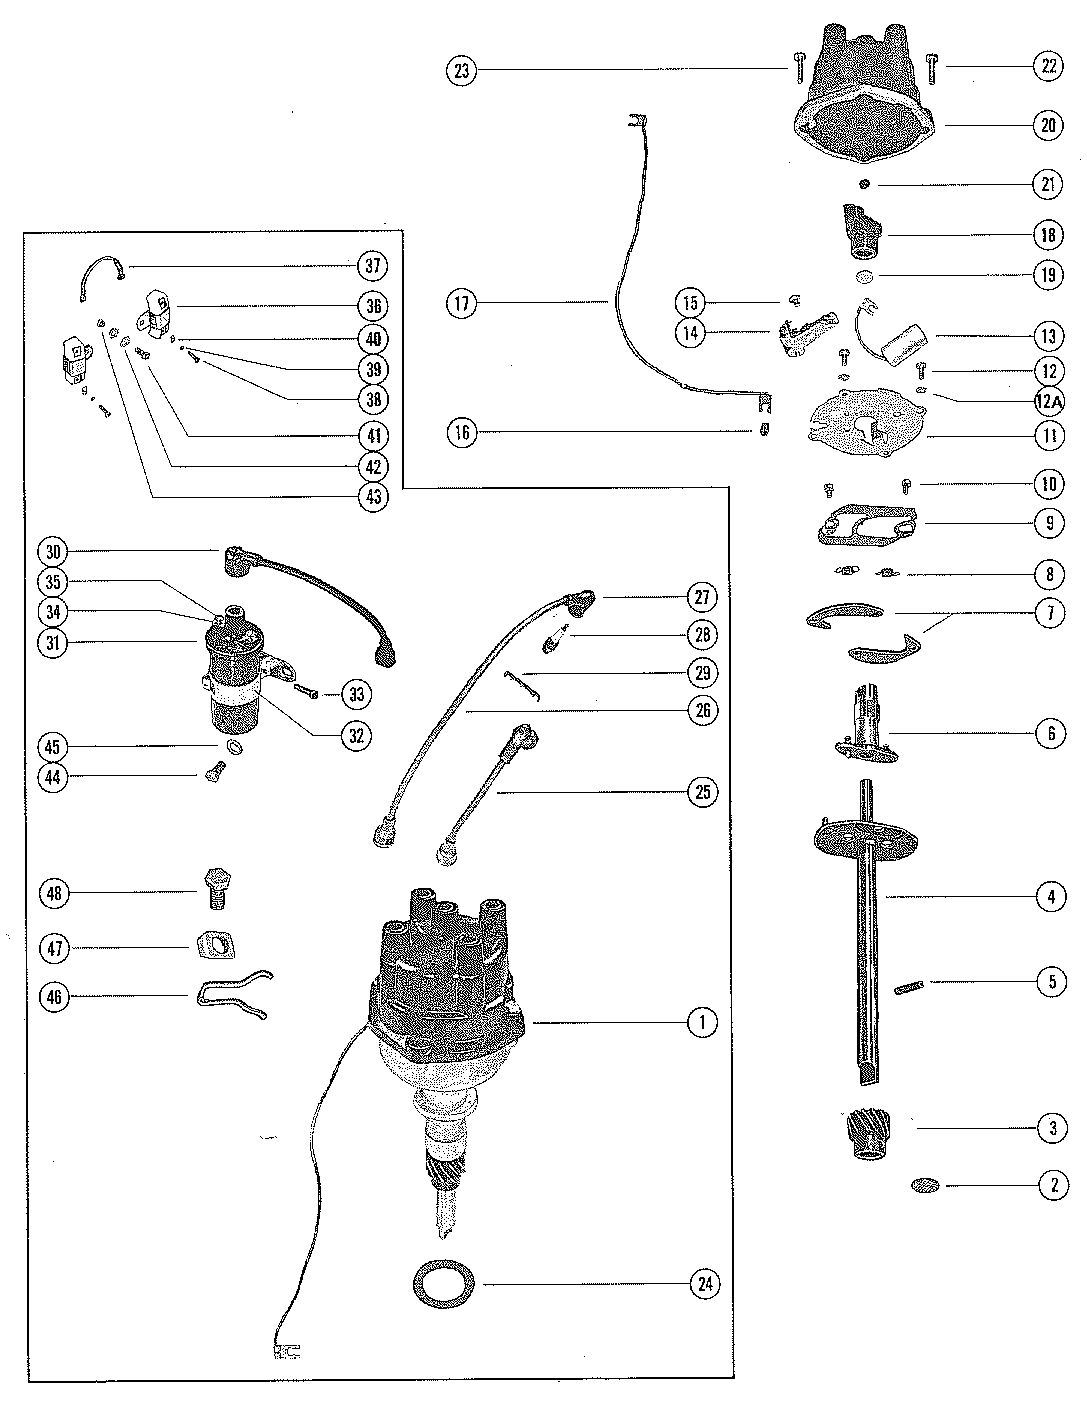 MERCRUISER 140 ENGINE (4 CYLINDER) DISTRIBUTOR ASSEMBLY AND COIL